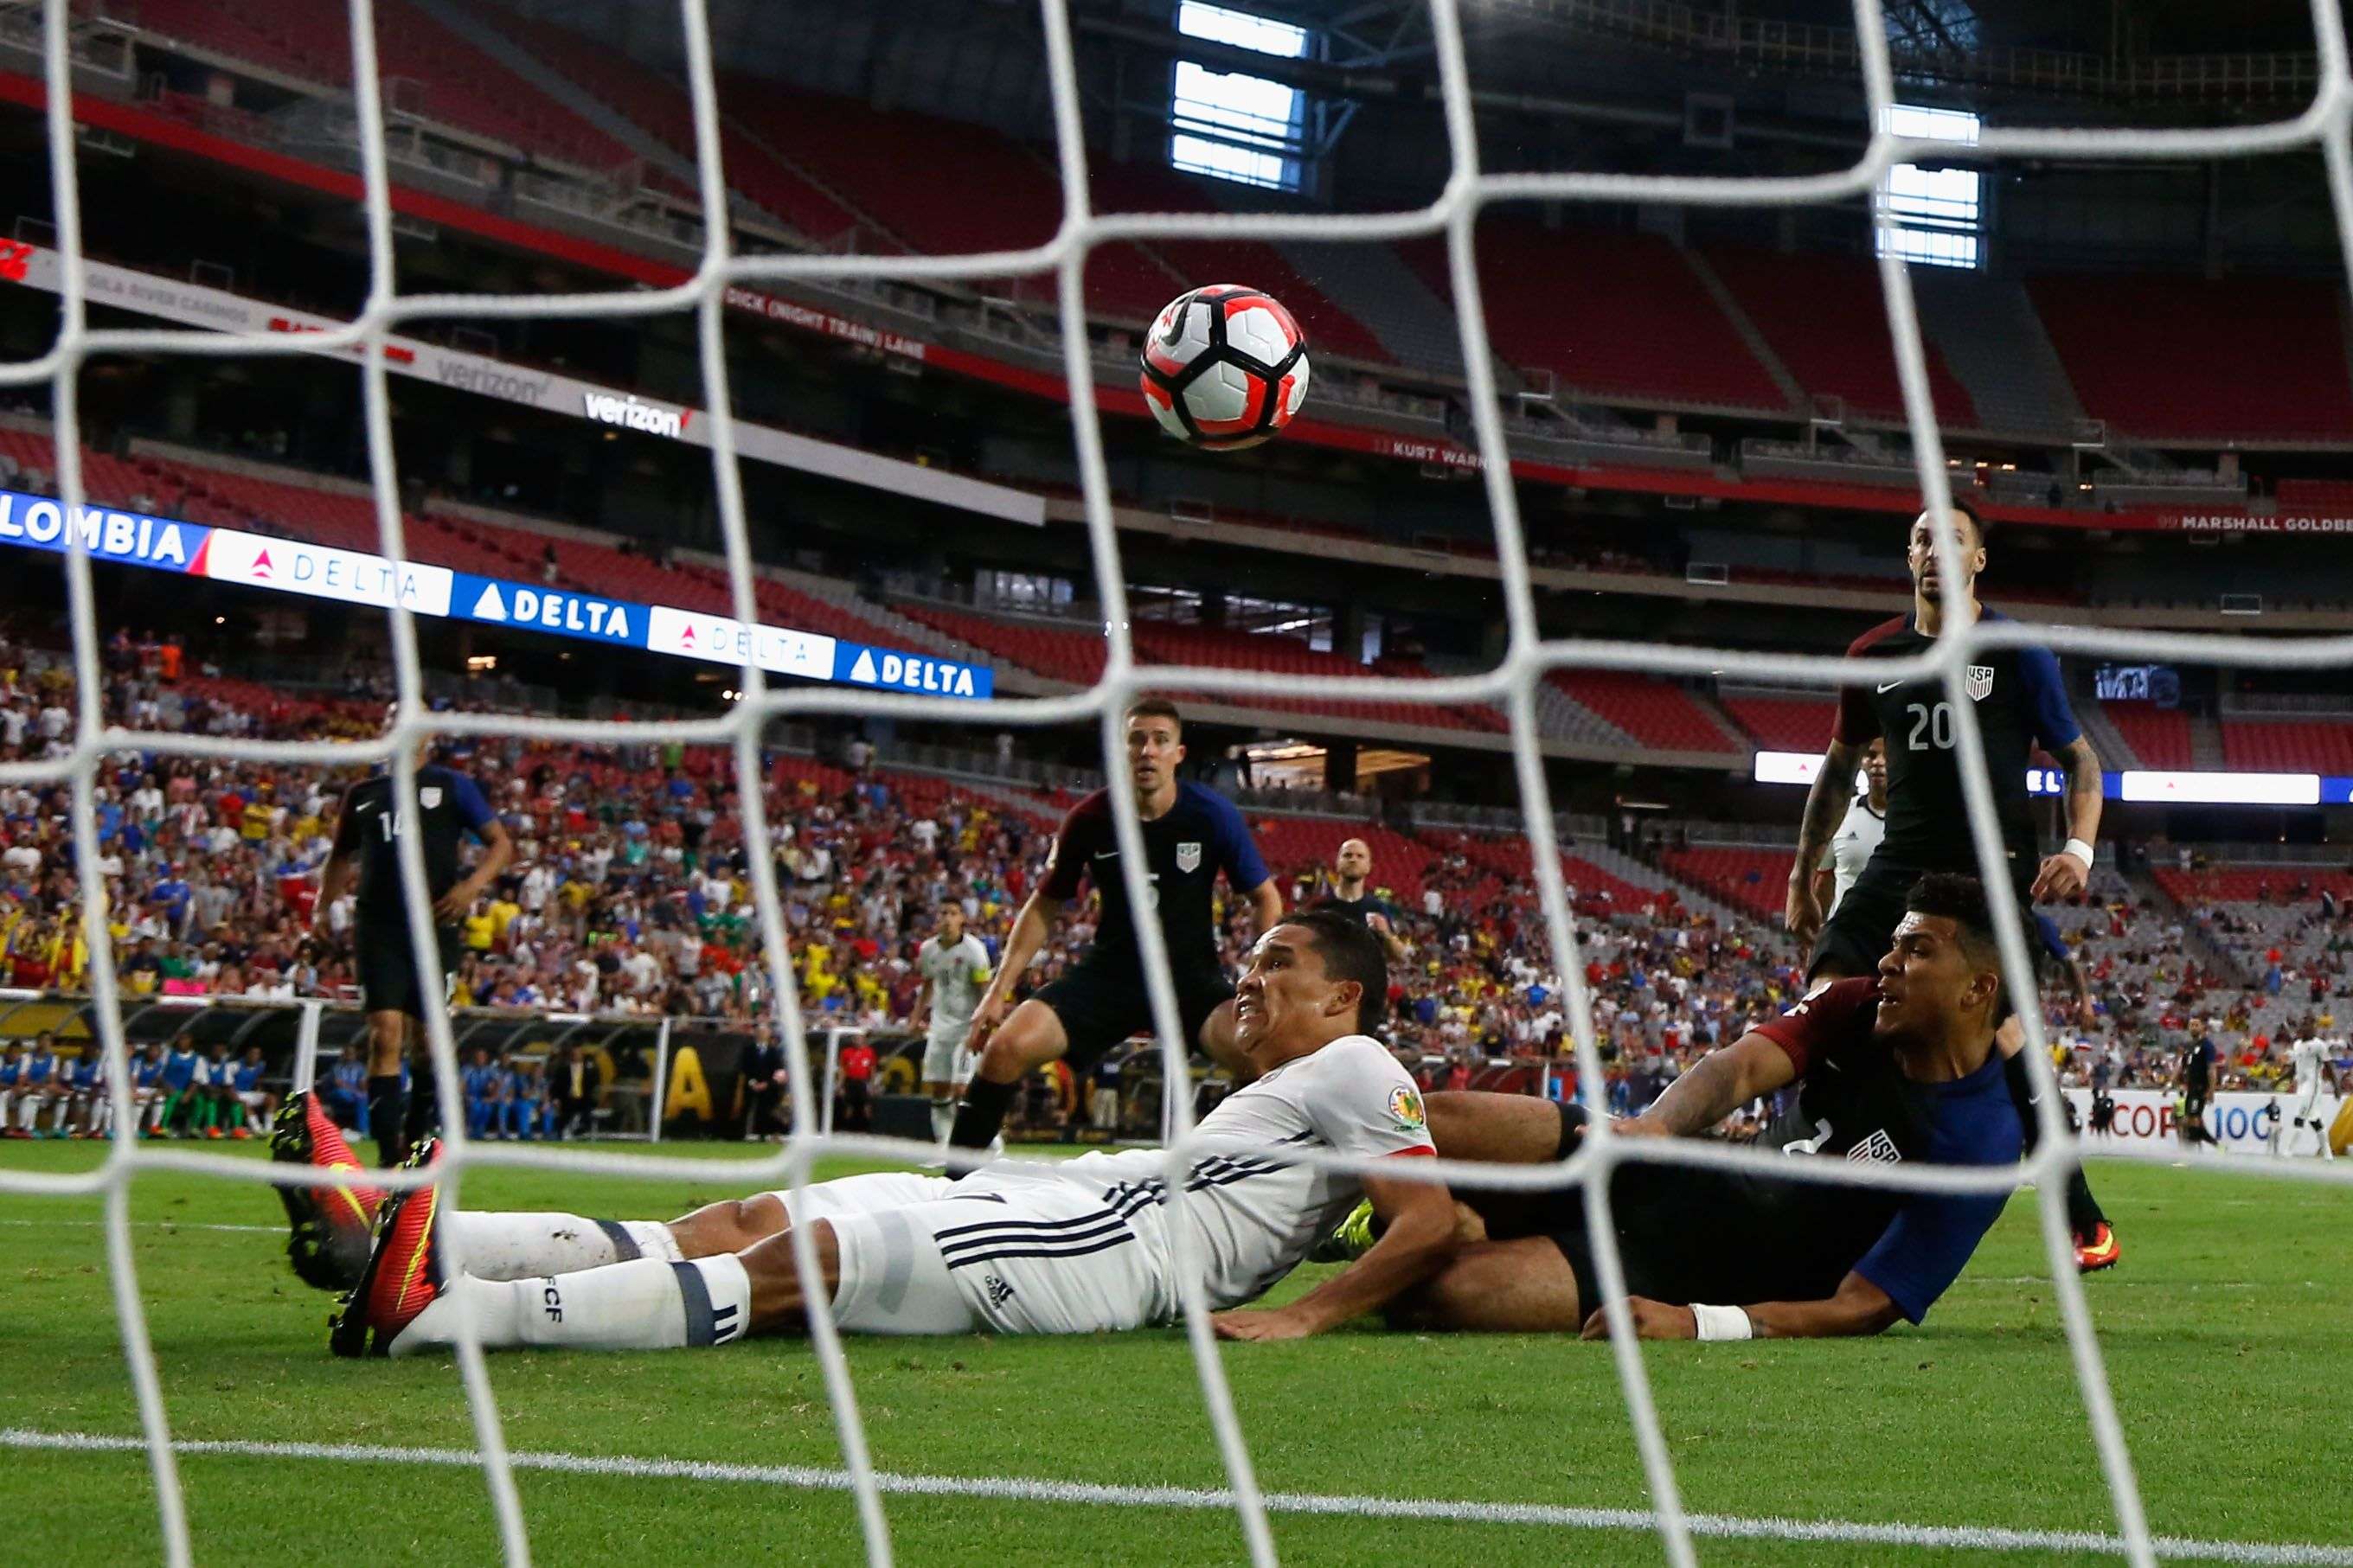 Carlos Bacca nets for Colombia as they scoop third place at the Copa America in Glendale, Arizona. Photo: AFP